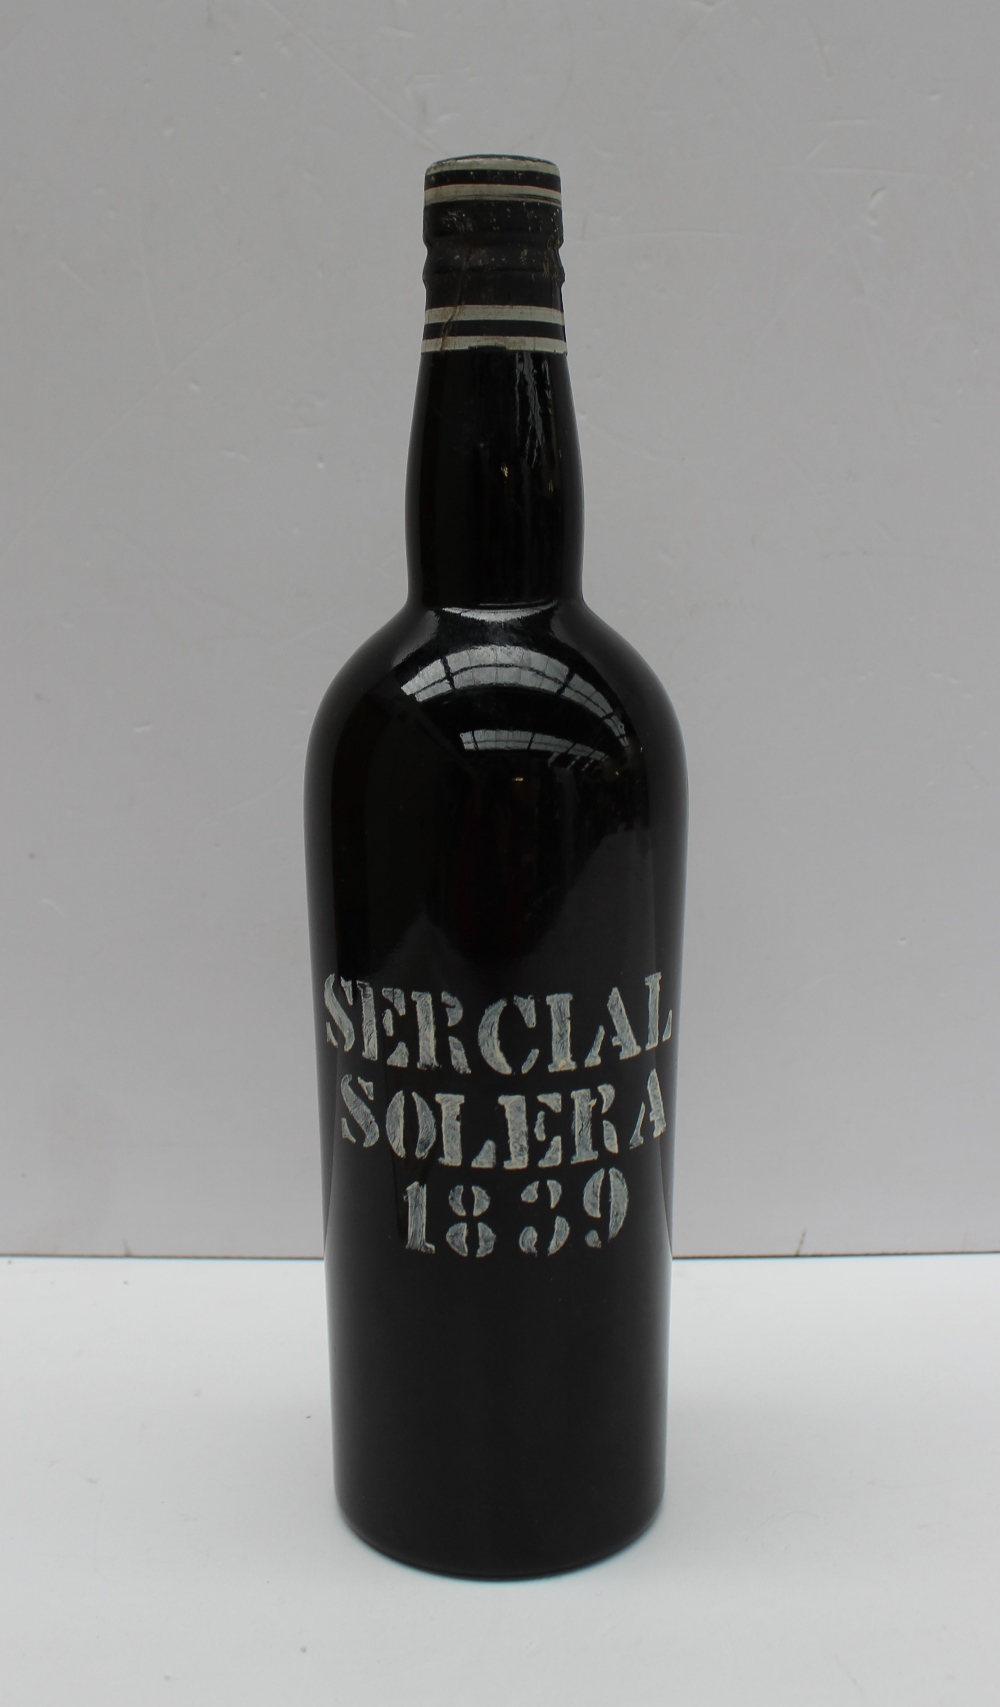 Gomes Madeira Sercial Solera 1839 - Gifted by Alfred Alves (a steel works owner in Lisbon) in 1974